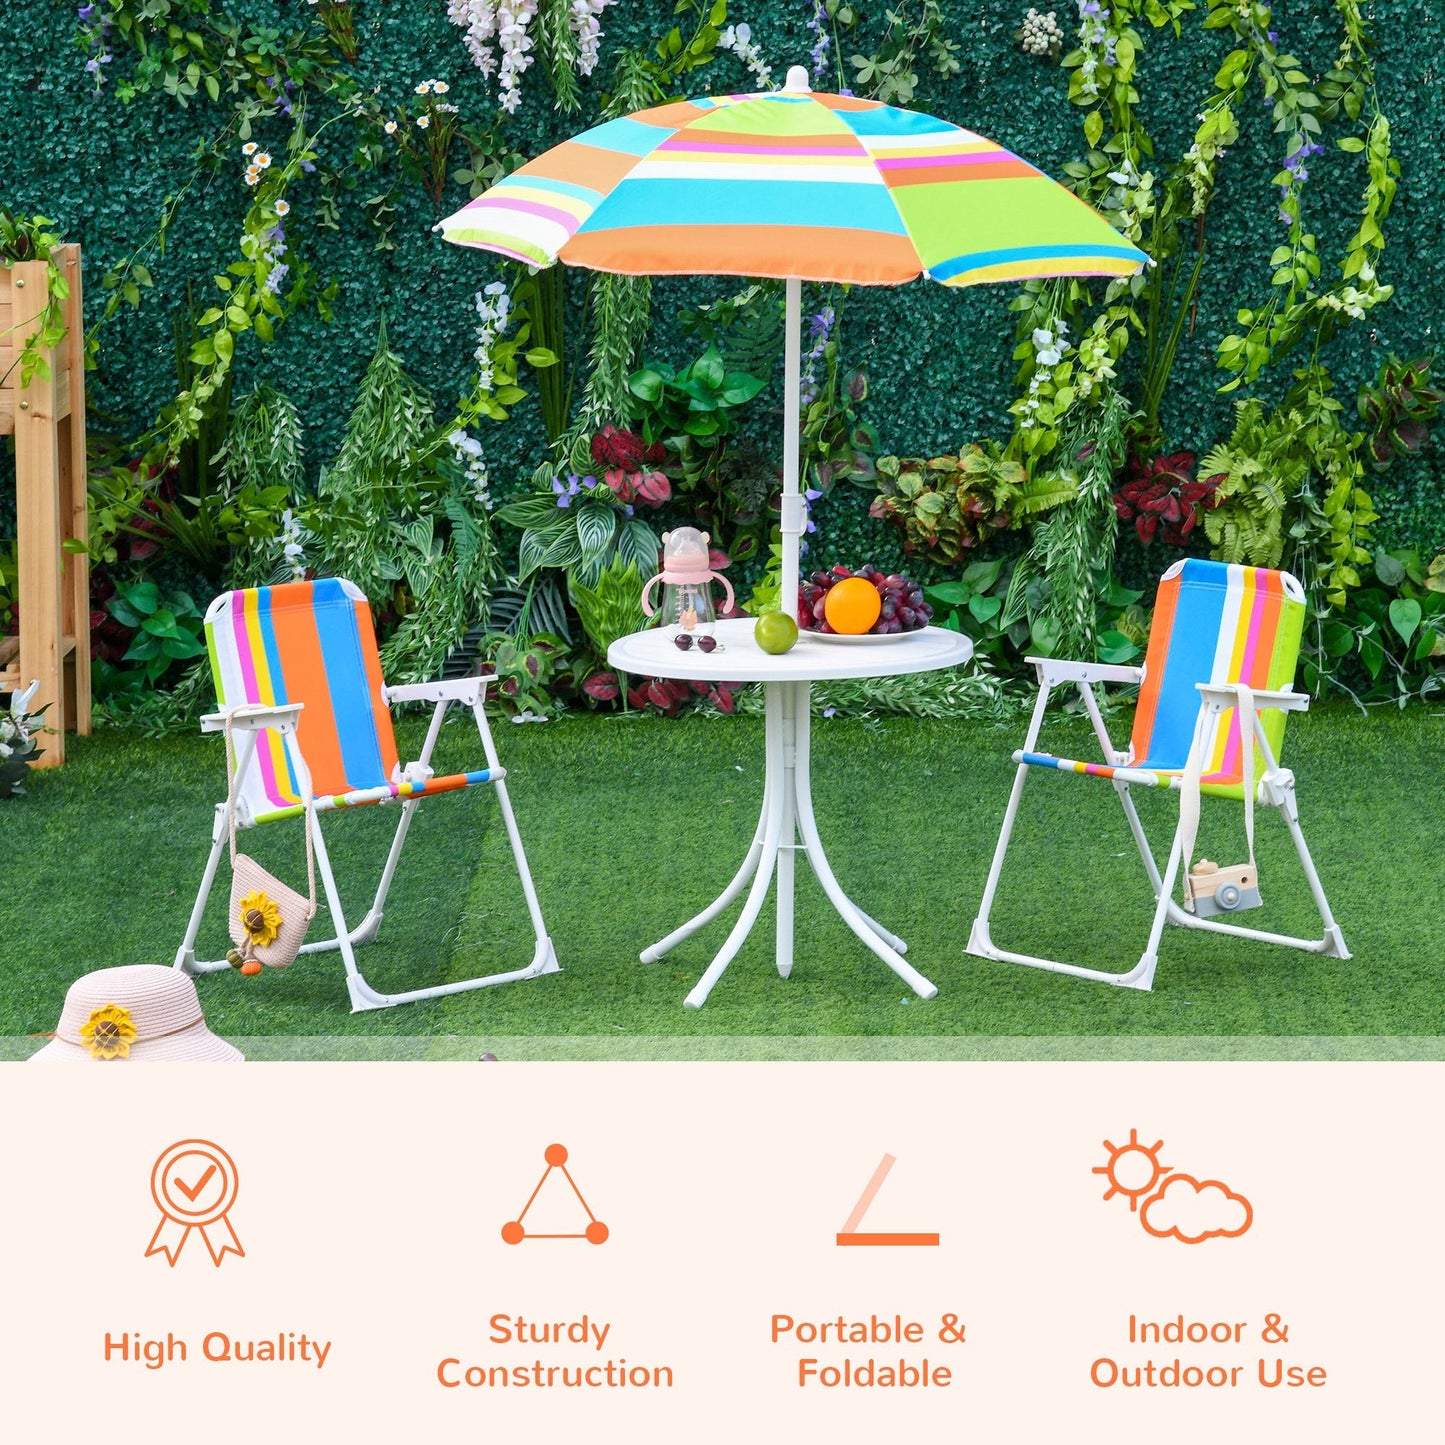 Outdoor and Garden-Kids Folding Table and Chairs Set Color Stripes for Outdoor Garden Patio Backyard with Removable & Height Adjustable Sun Umbrella, Multi - Outdoor Style Company